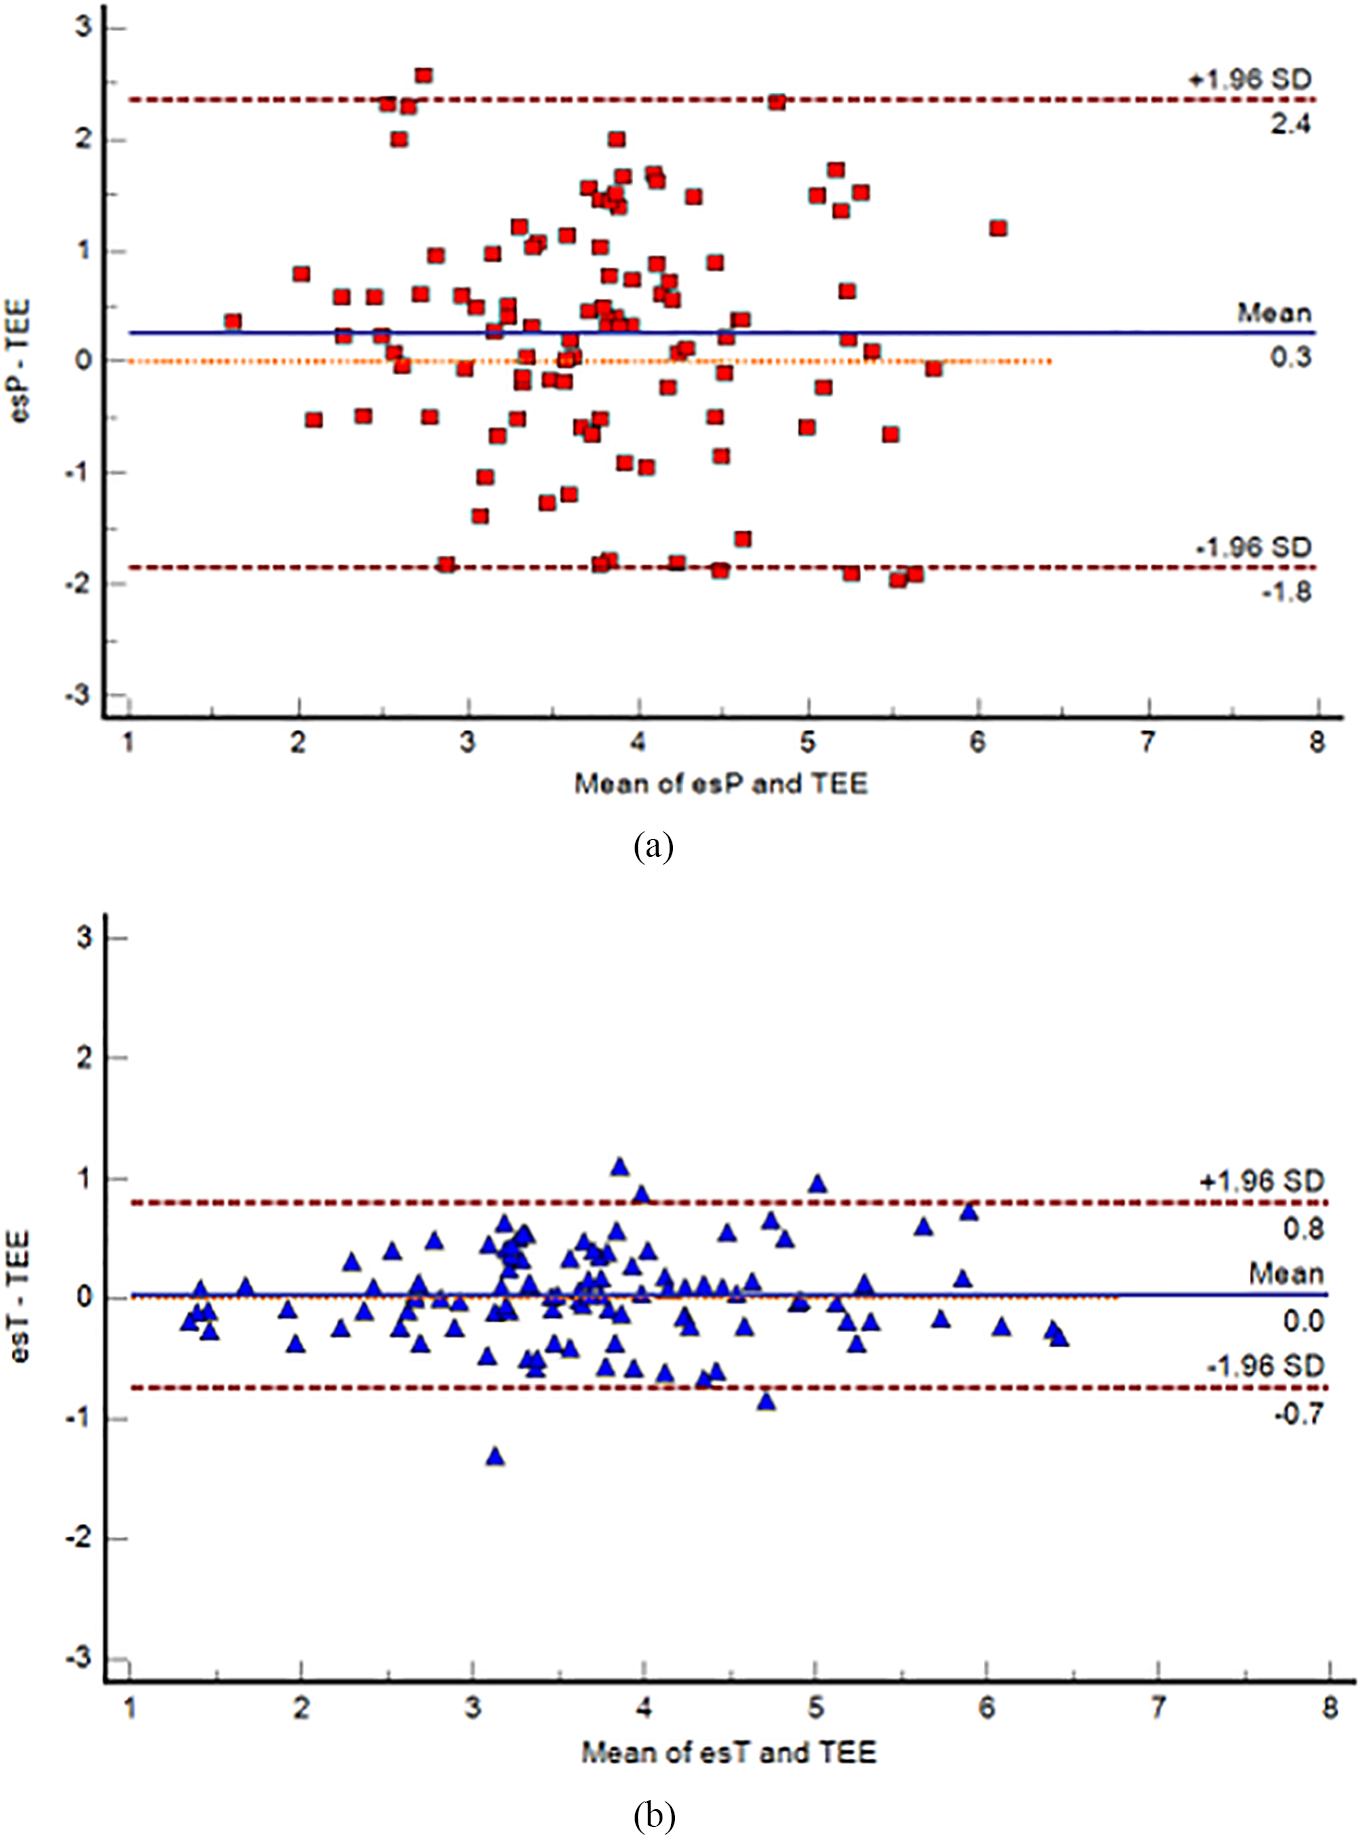 Bland-Altman plots for the agreement analysis between esP and TEE (a), and esT and TEE (b). The blue continuous lines show the mean difference (bias), and the red dashed lines show the upper and lower 95% limits of agreement (LoA). TEE = transesophageal echocardiogram; esP = esCCO calibrated by patient information; esT = esCCO calibrated by TEE; SD = standard deviation.